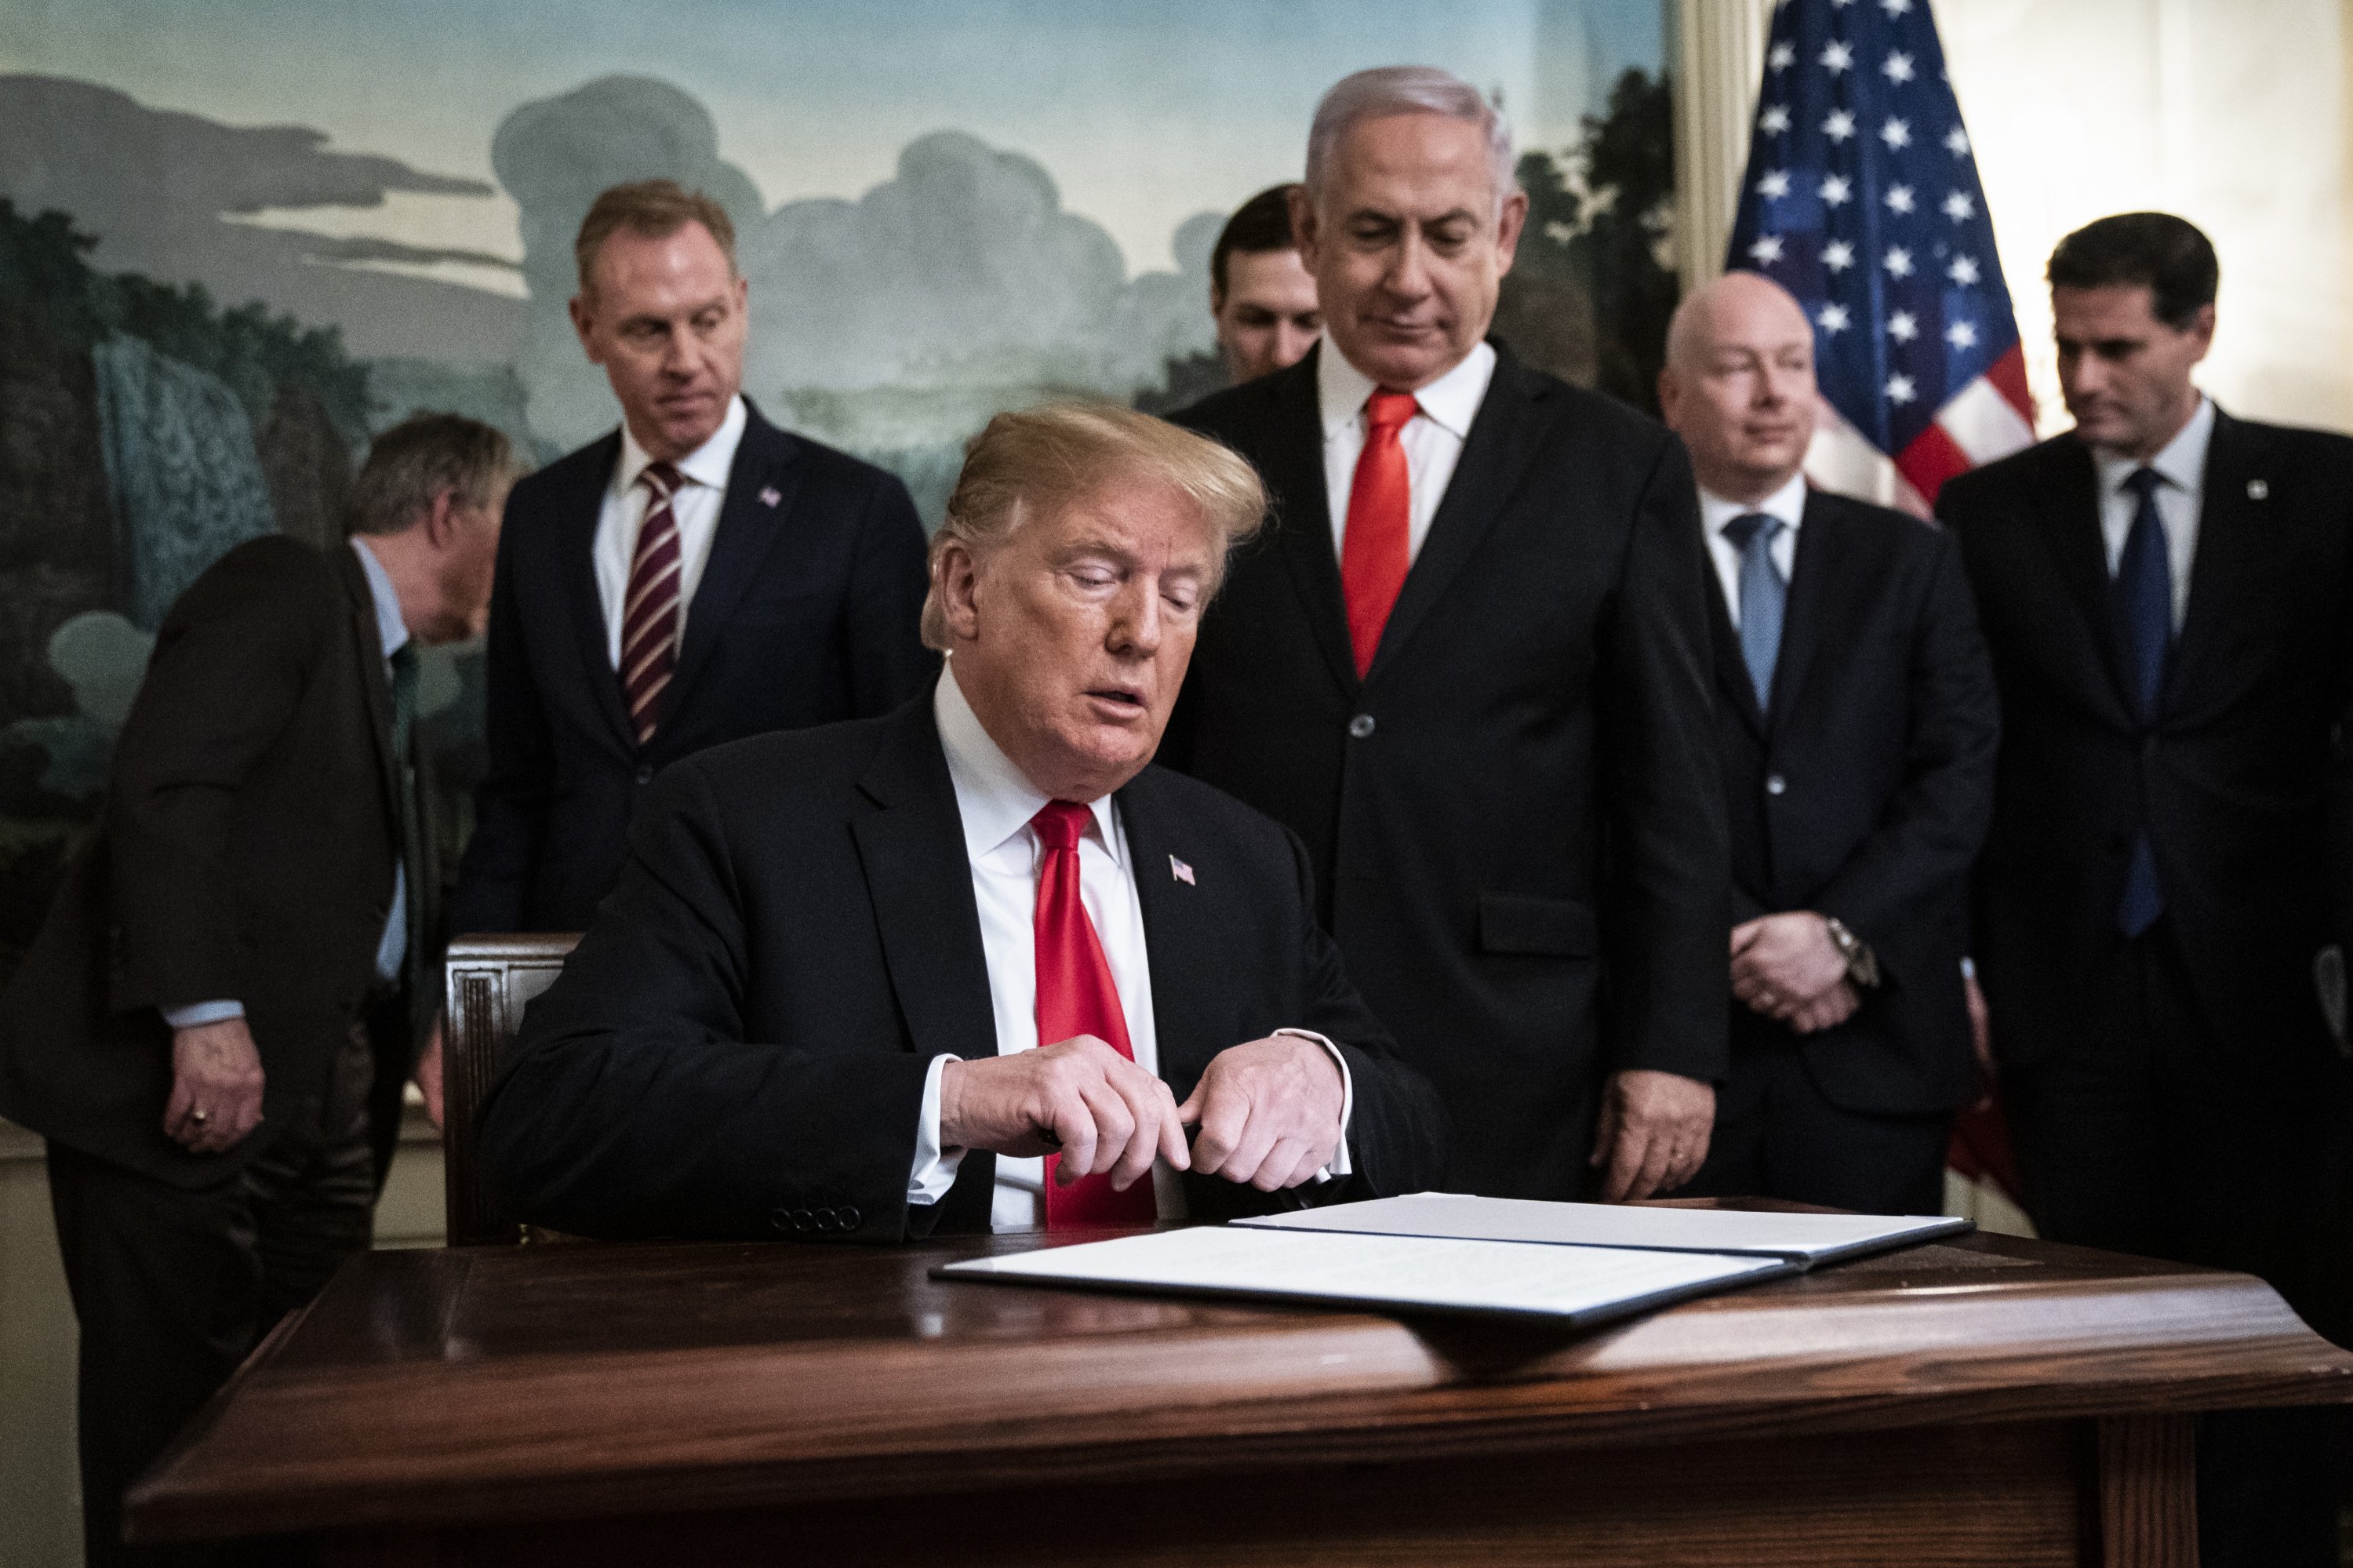 Then U.S. President Donald Trump signs a presidential proclamation on Golan Heights as then Israeli Prime Minister Benjamin Netanyahu watches in the Diplomatic Reception Room at the White House, in Washington, D.C., U.S., March 25, 2019. (Photo by Getty Images)